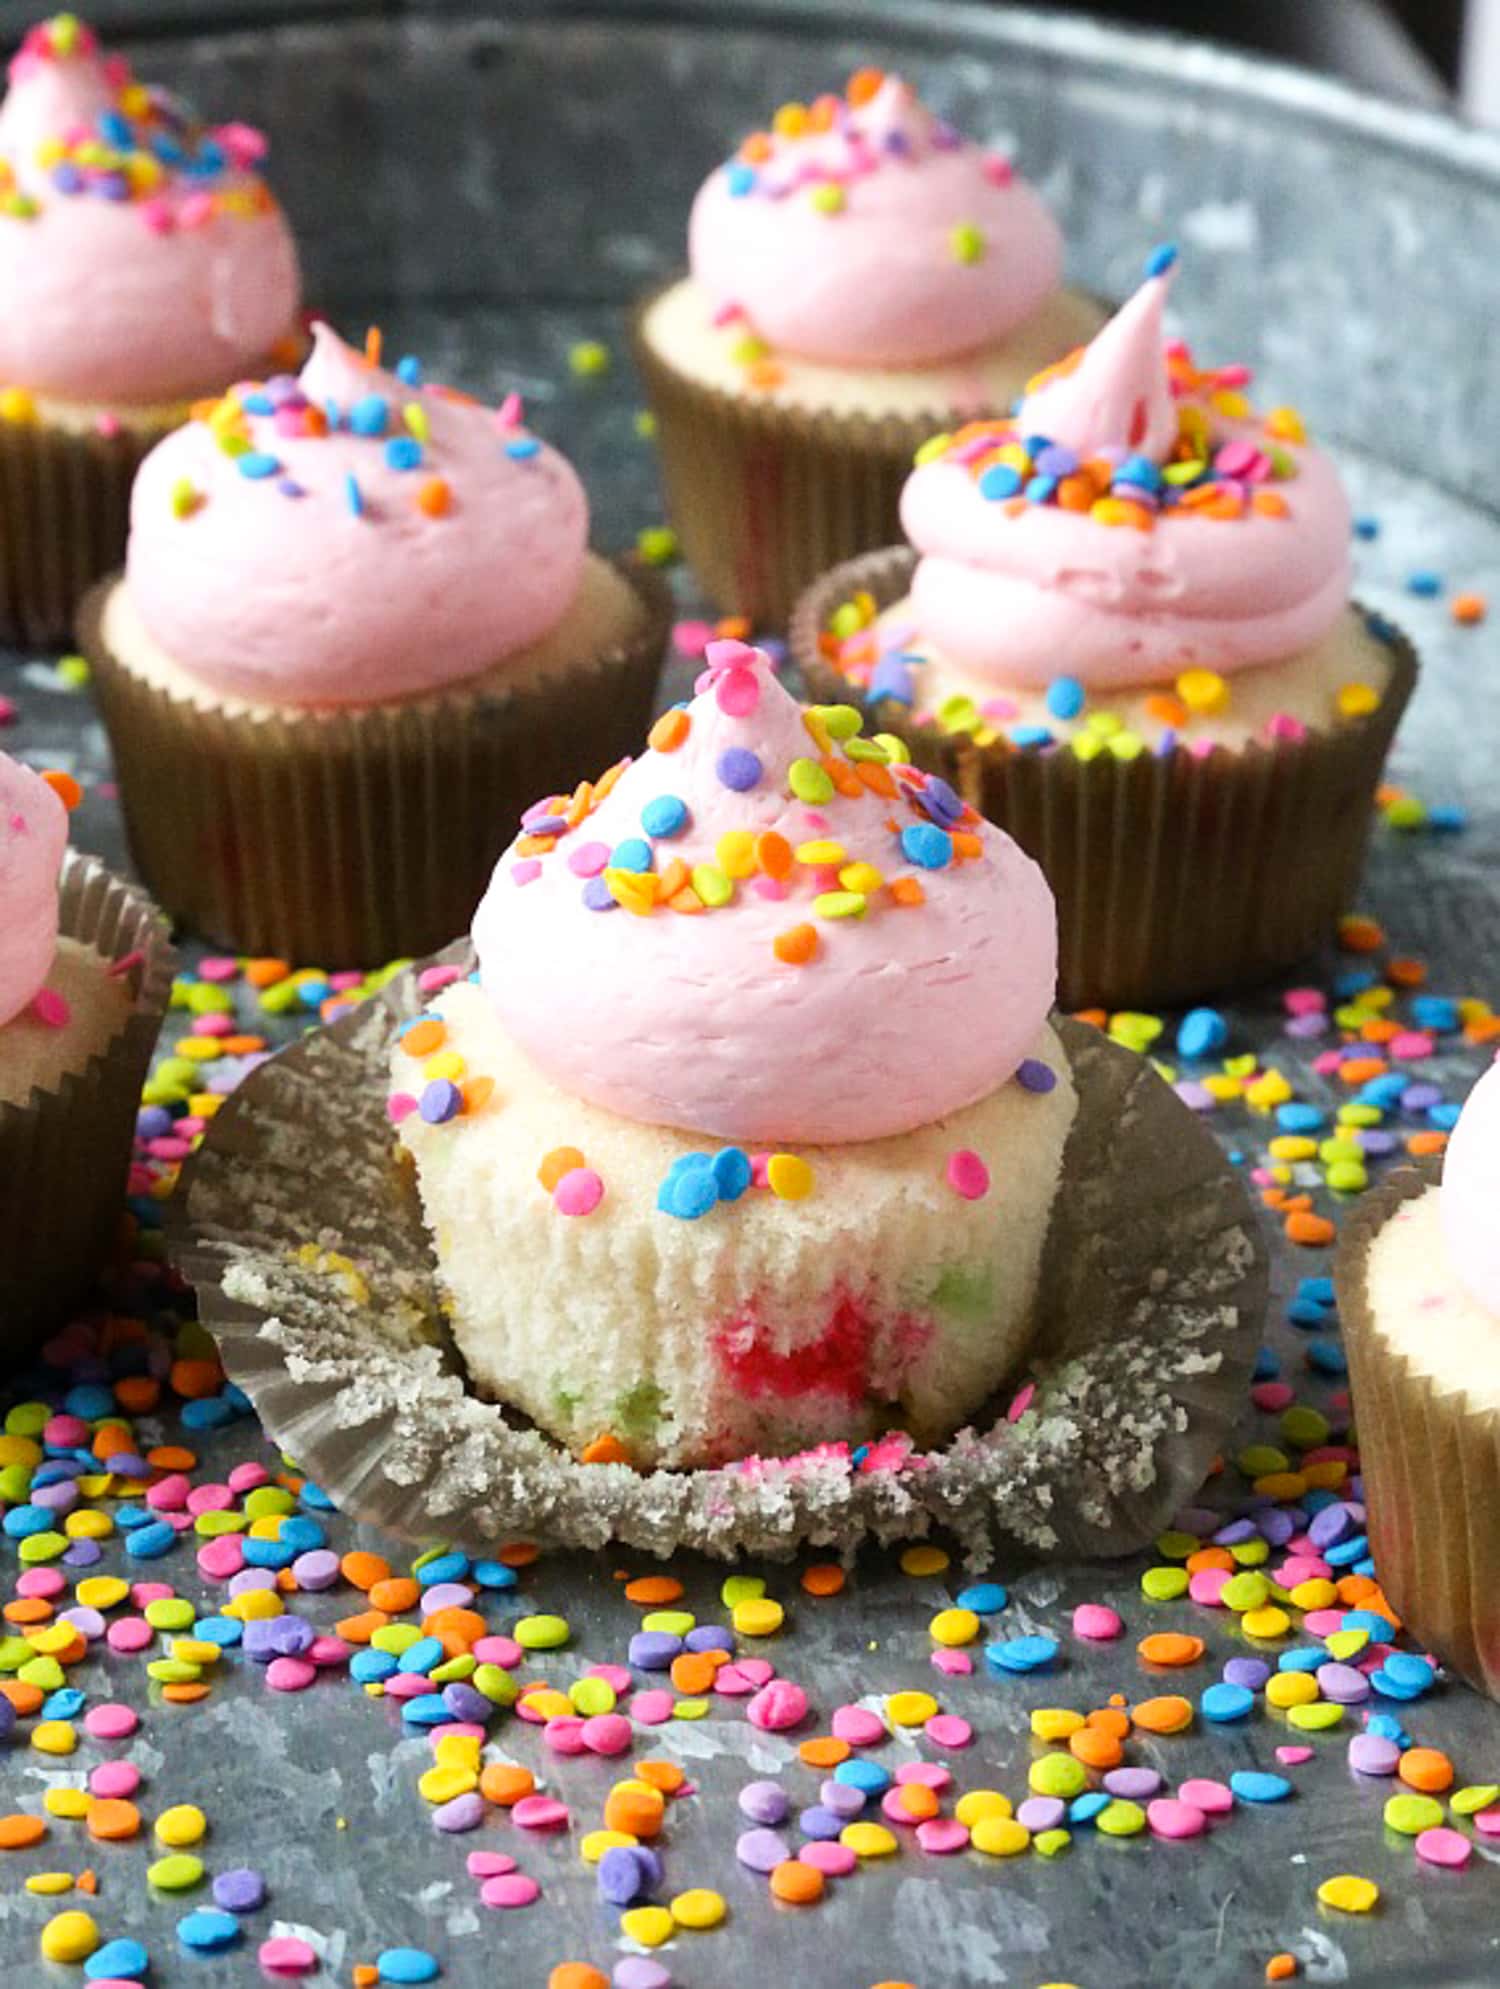 A sprinkled cupcake with the peel-off liner topped with pink buttercream frosting and sprinkles